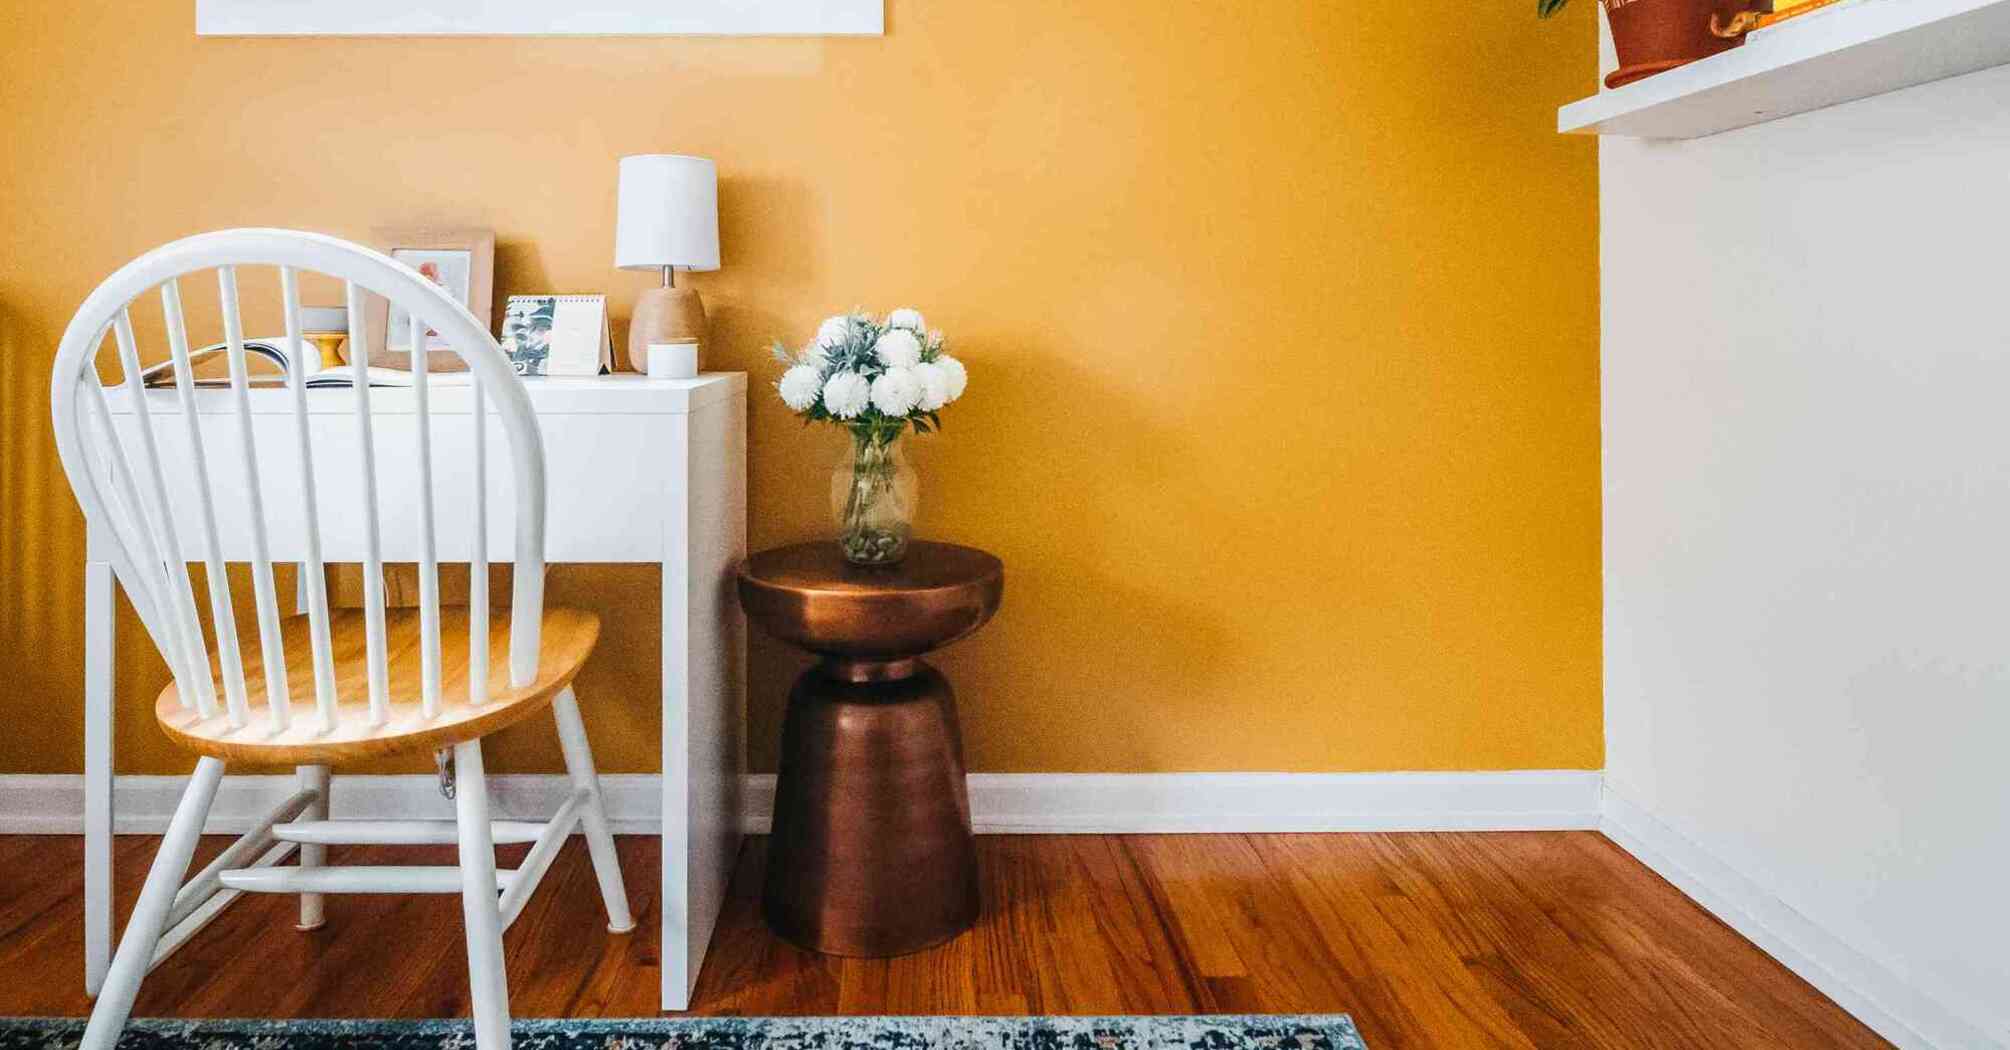 How to choose colors for different rooms